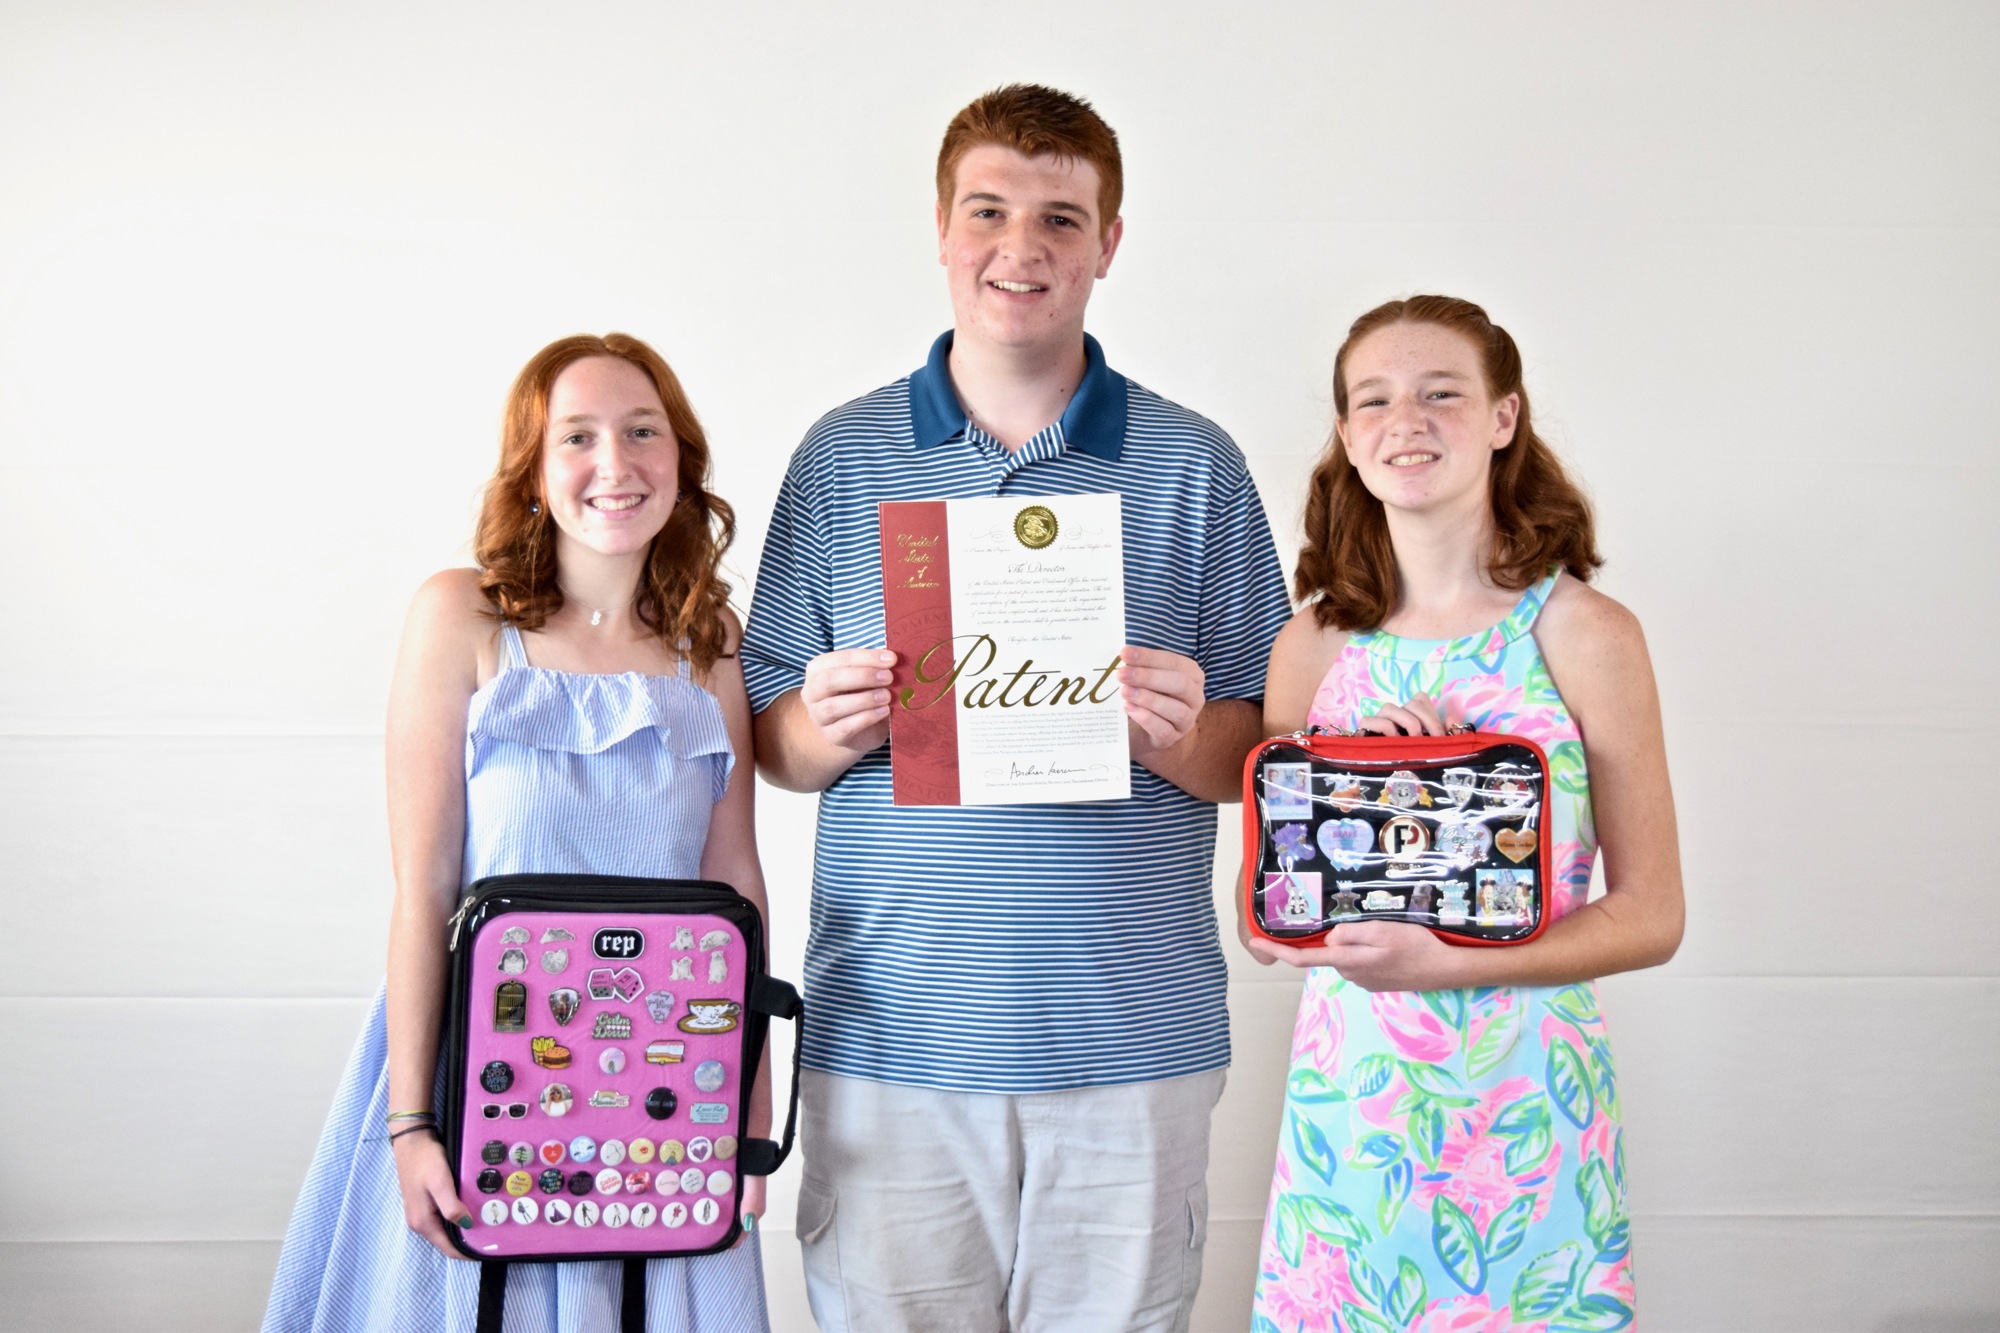 Sydney, Alex and Julia Hevier recently received their patent for the PinFolio.